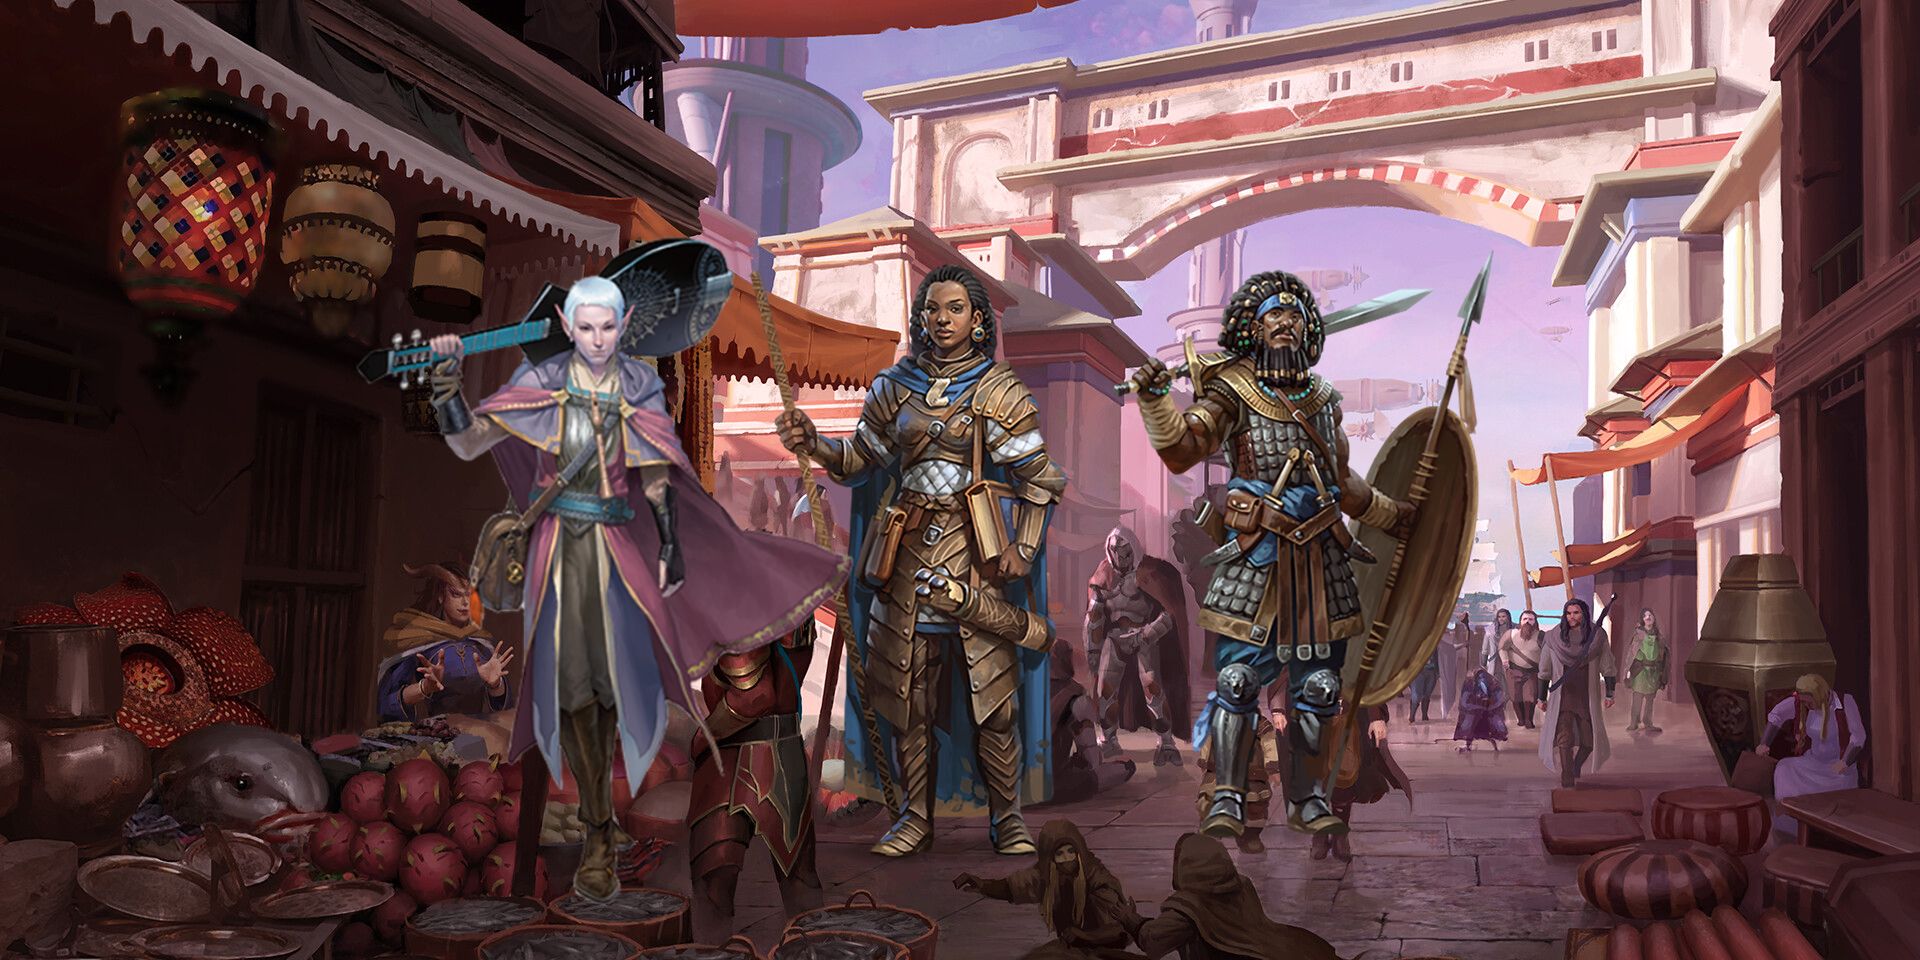 A Dungeons and Dragons adventuring party in a peaceful, bustling open-air market.